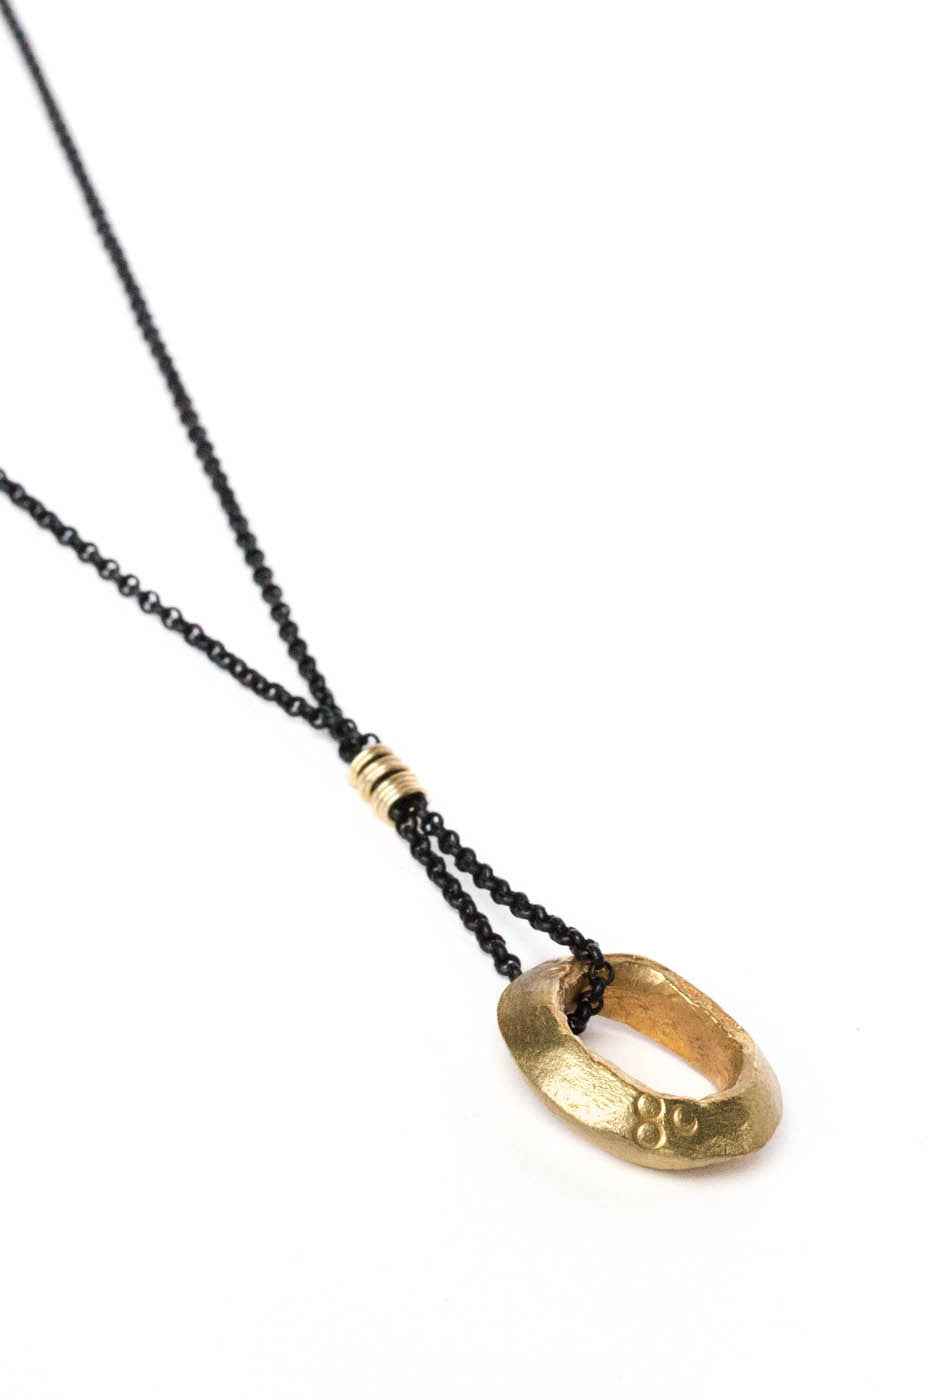 Golden Ethiopian Ring Necklace on Black Chain